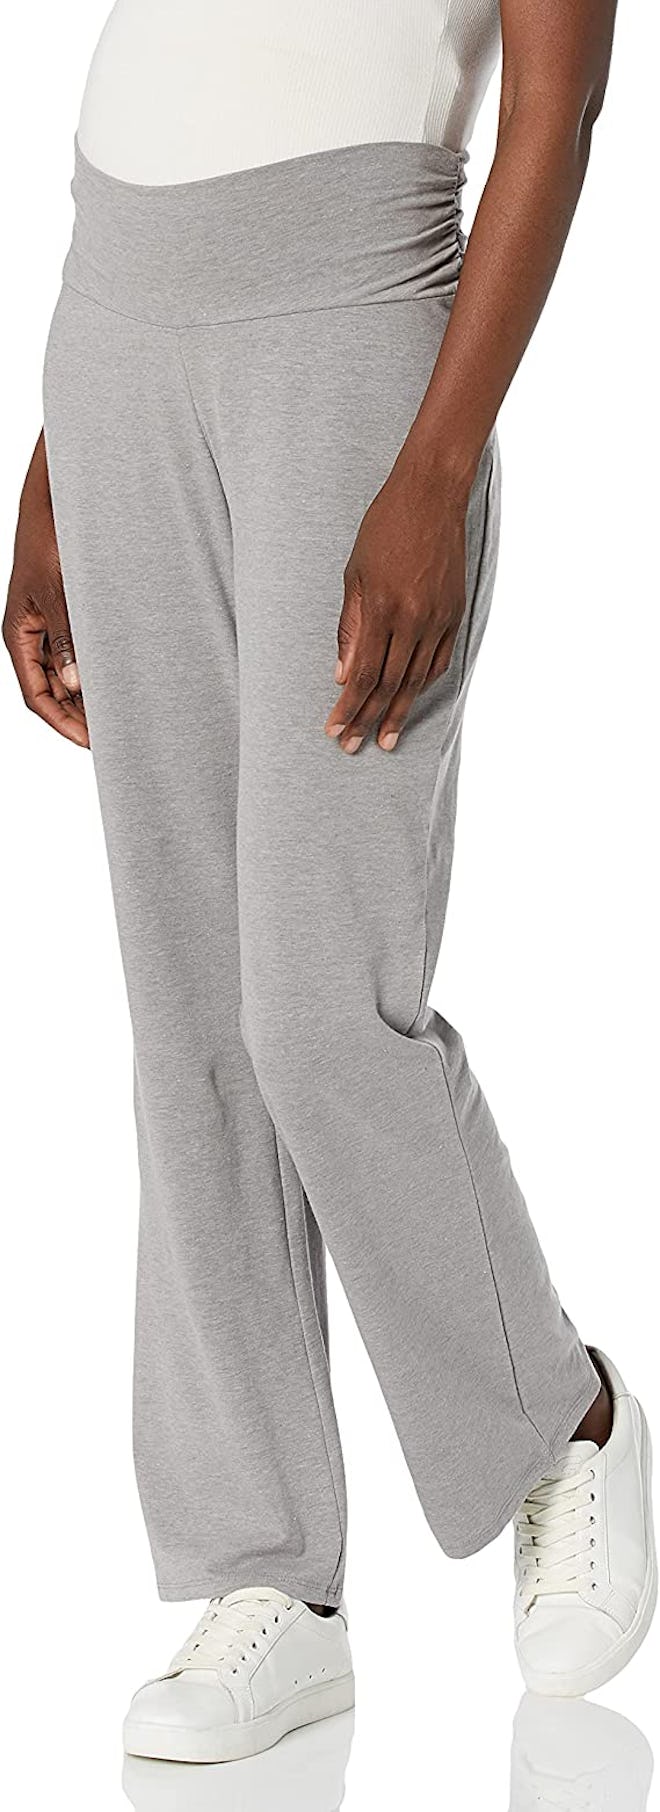 Maternity pajamas should be comfortable, and these pants are the pinnacle of comfort.